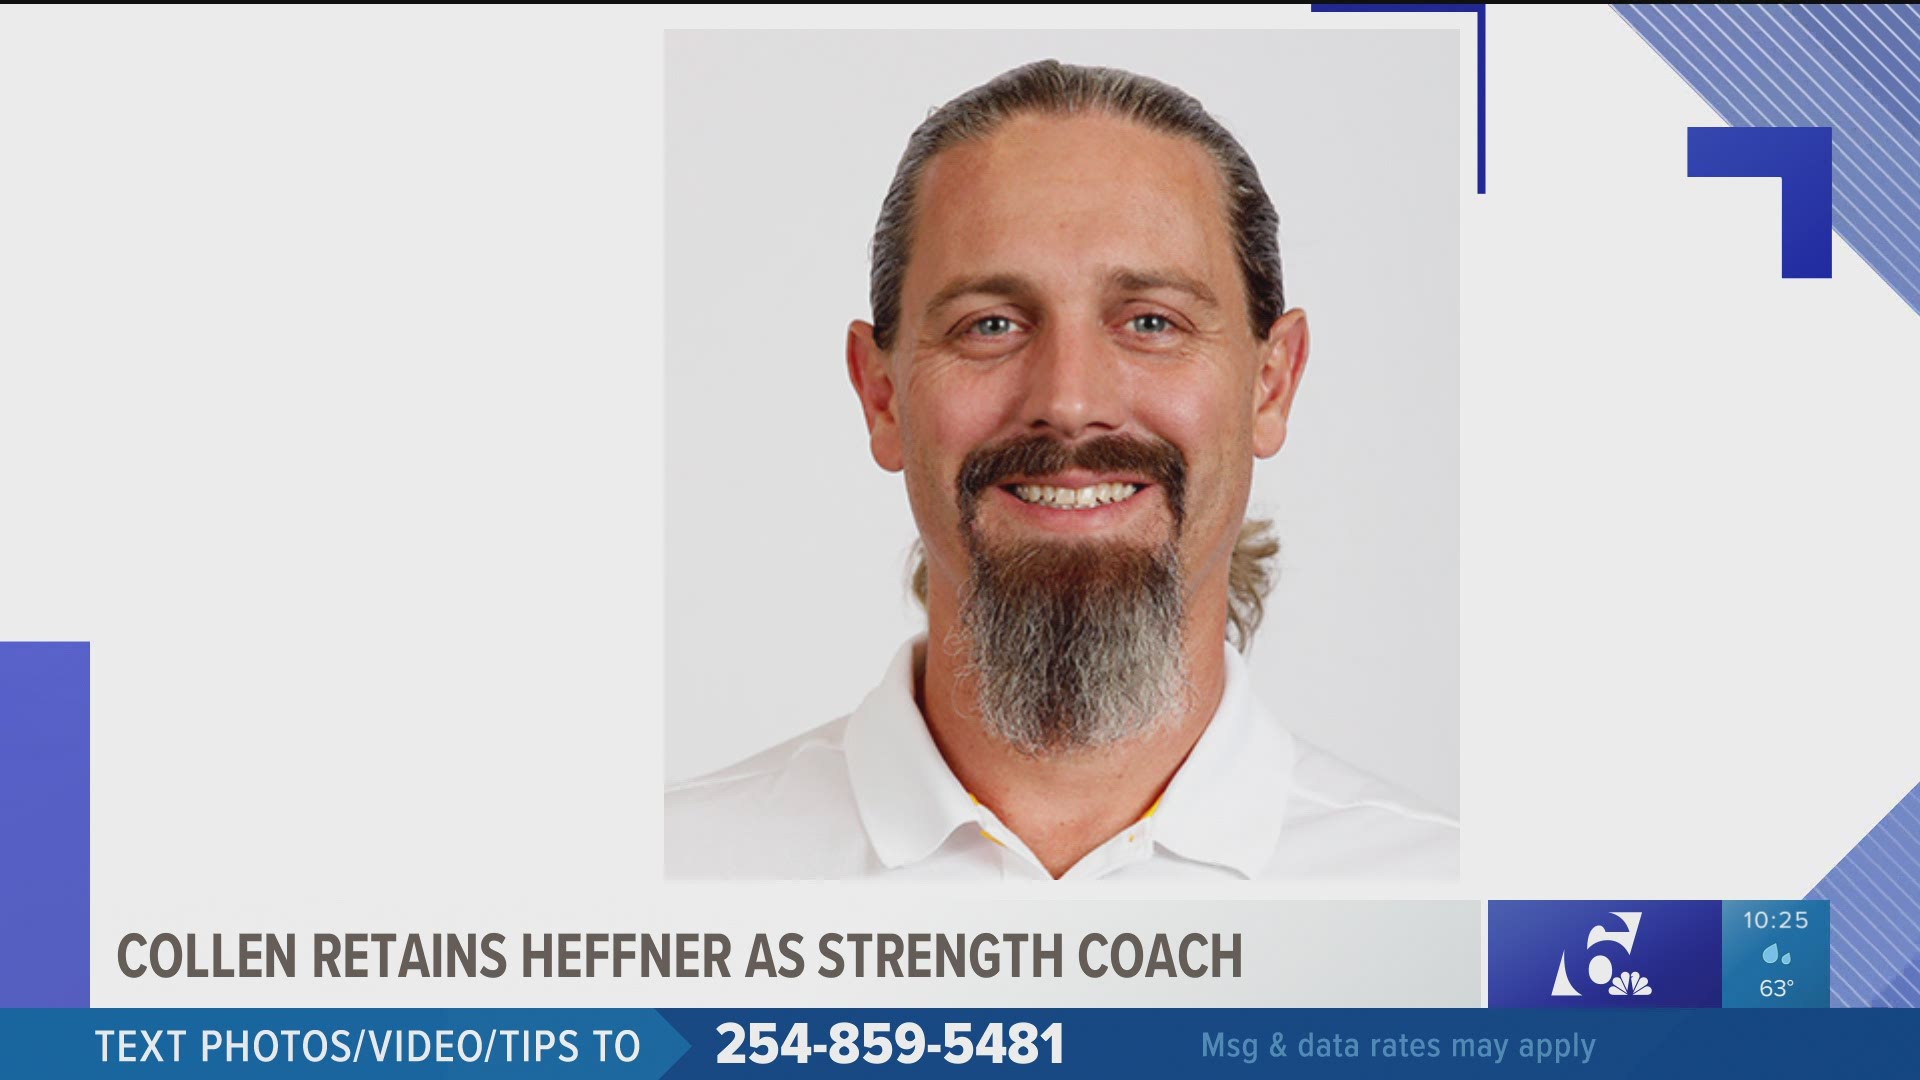 Collen announced her first staff hire Tuesday, retaining longtime Lady Bears strength coach Jeremy Heffner.